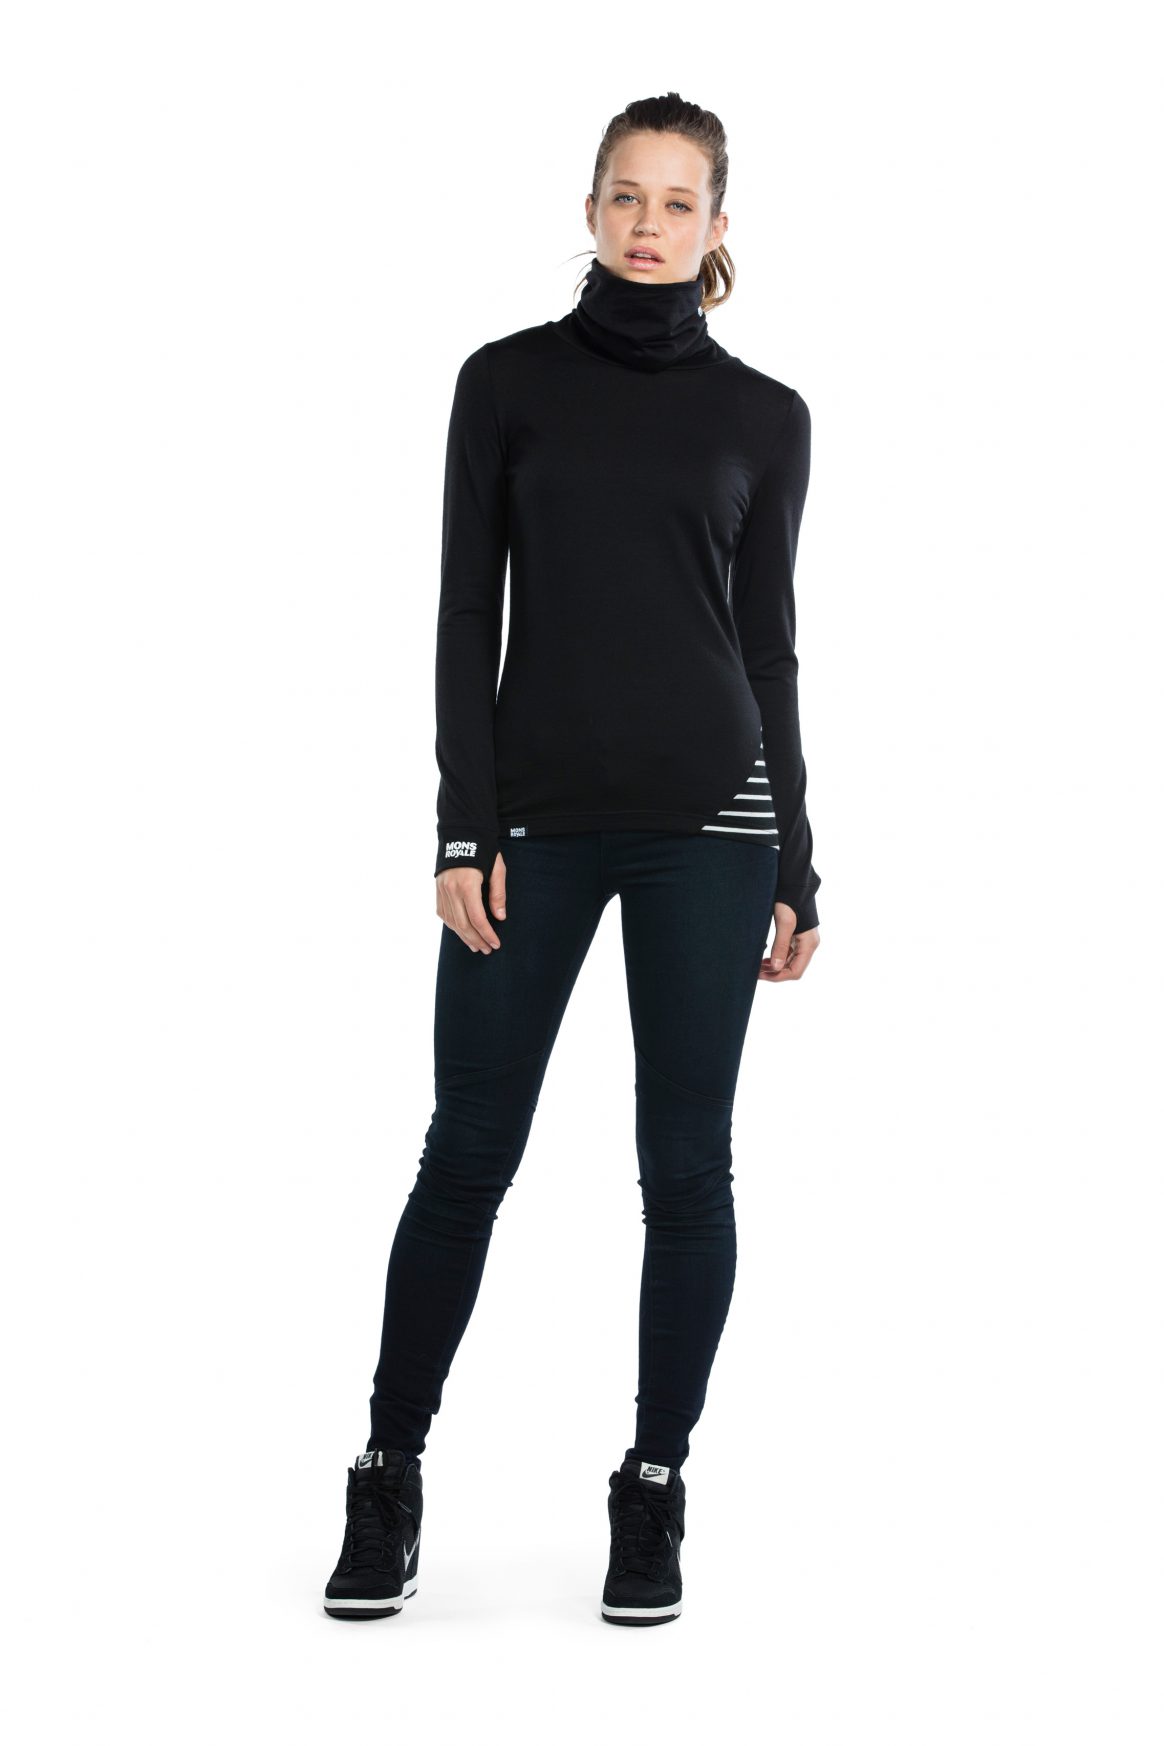 Mons Royale WMN's Cornice Rollover Baselayer Review